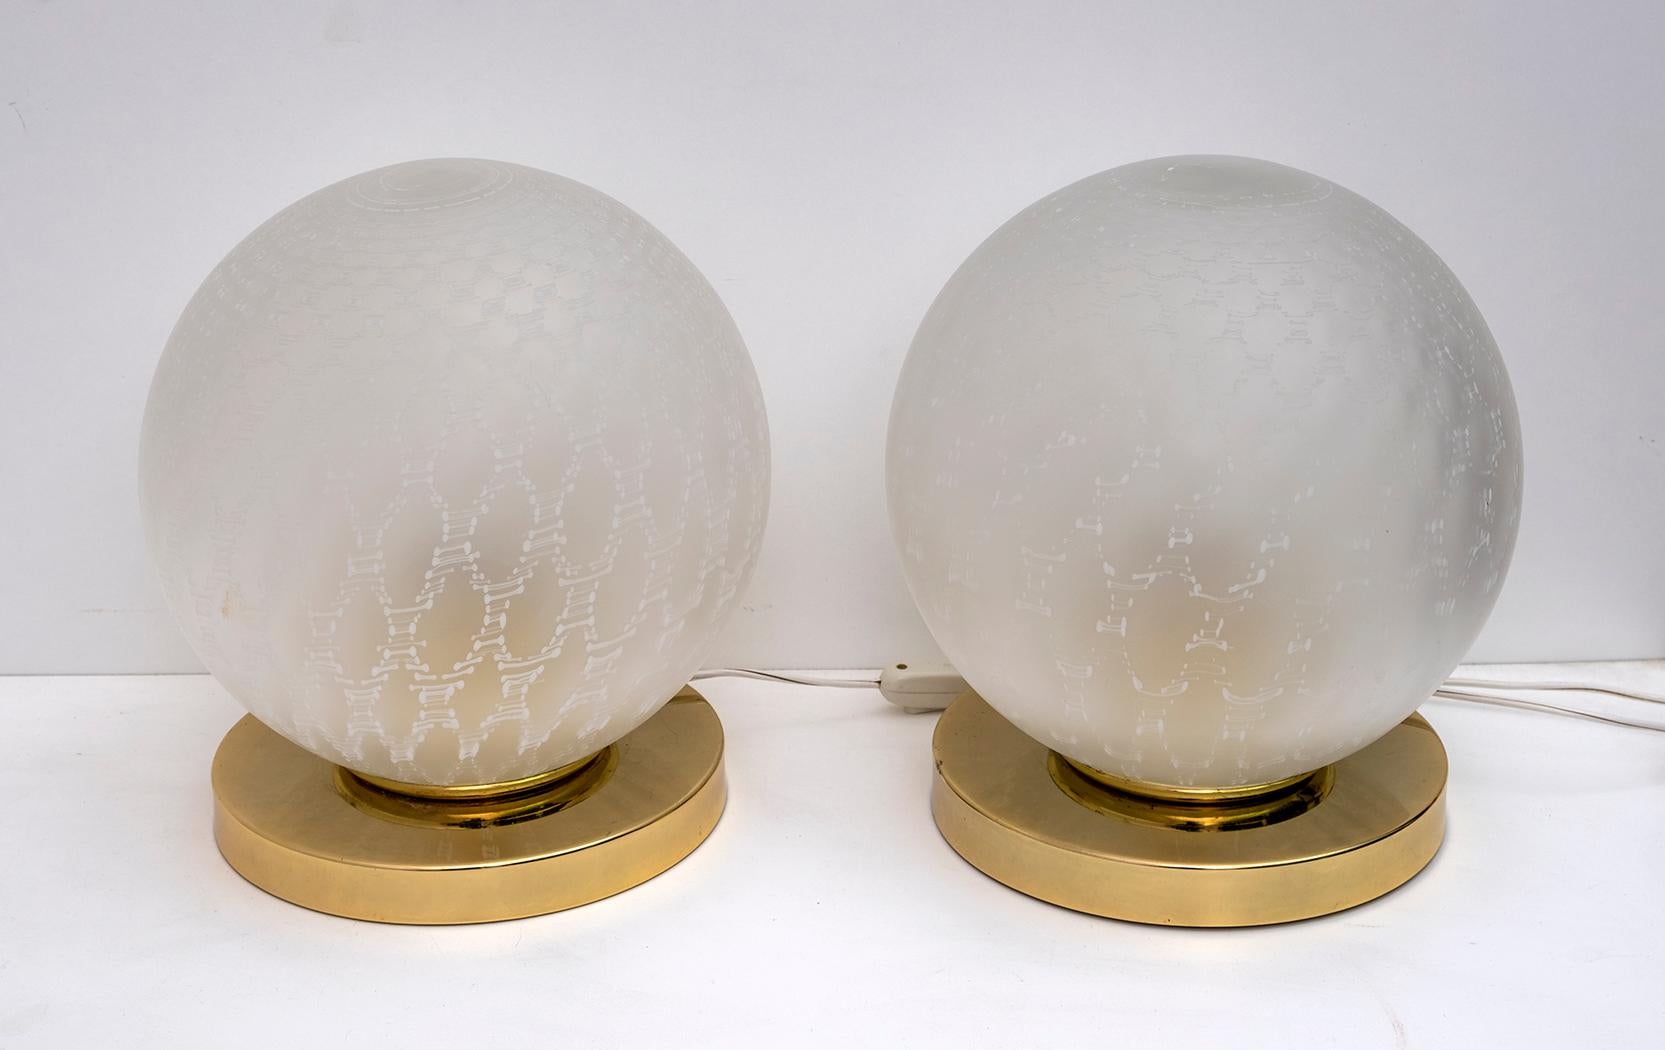 Pair of large sphere lamps in satin-finished Murano glass and brass bases, Italy, 1970s.